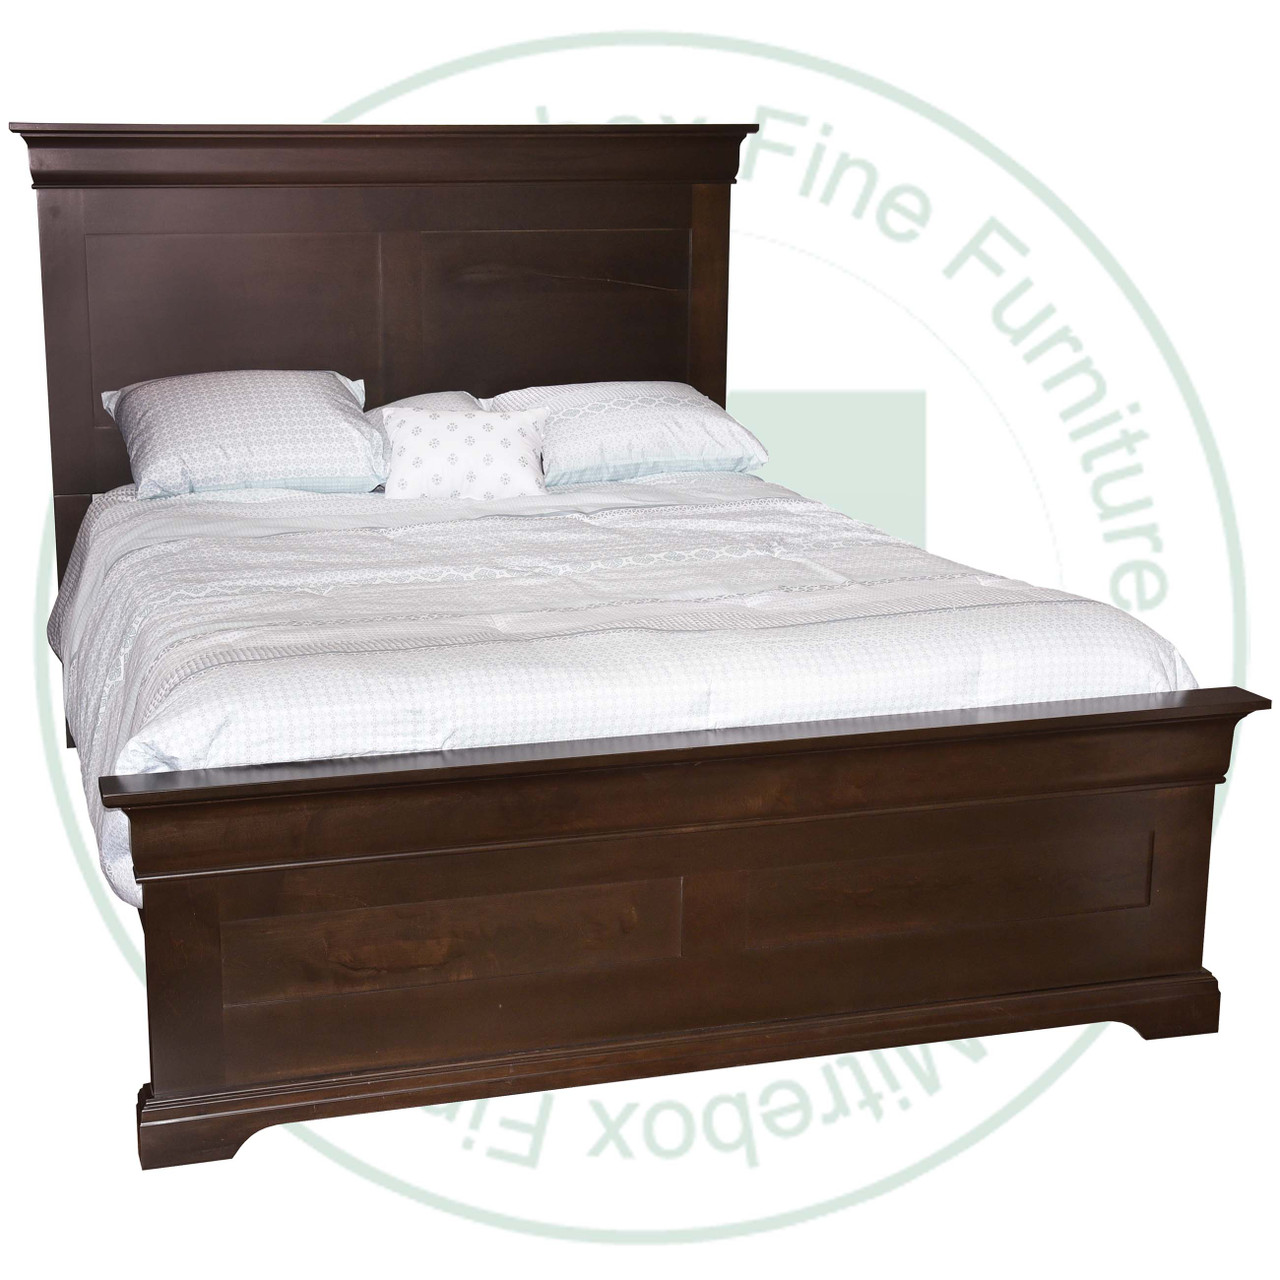 Maple Denmark Double Bed With Low Footboard